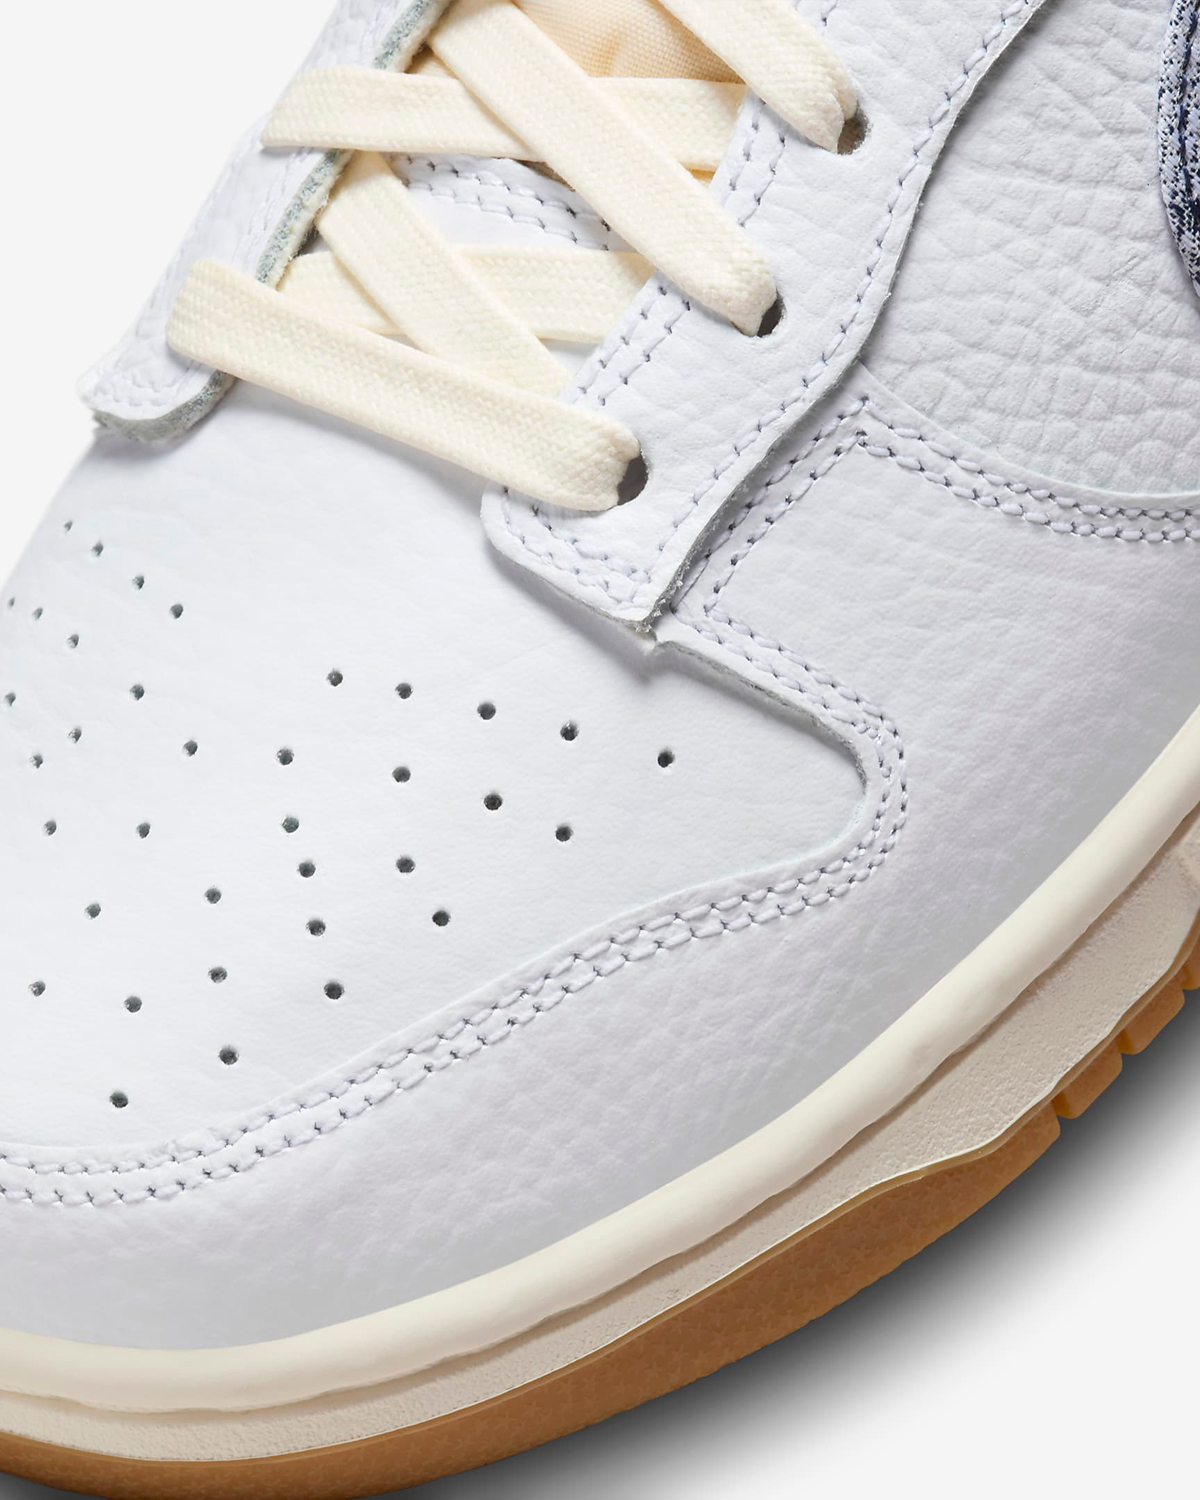 Nike-Dunk-Low-Washed-Denim-Release-Date-7